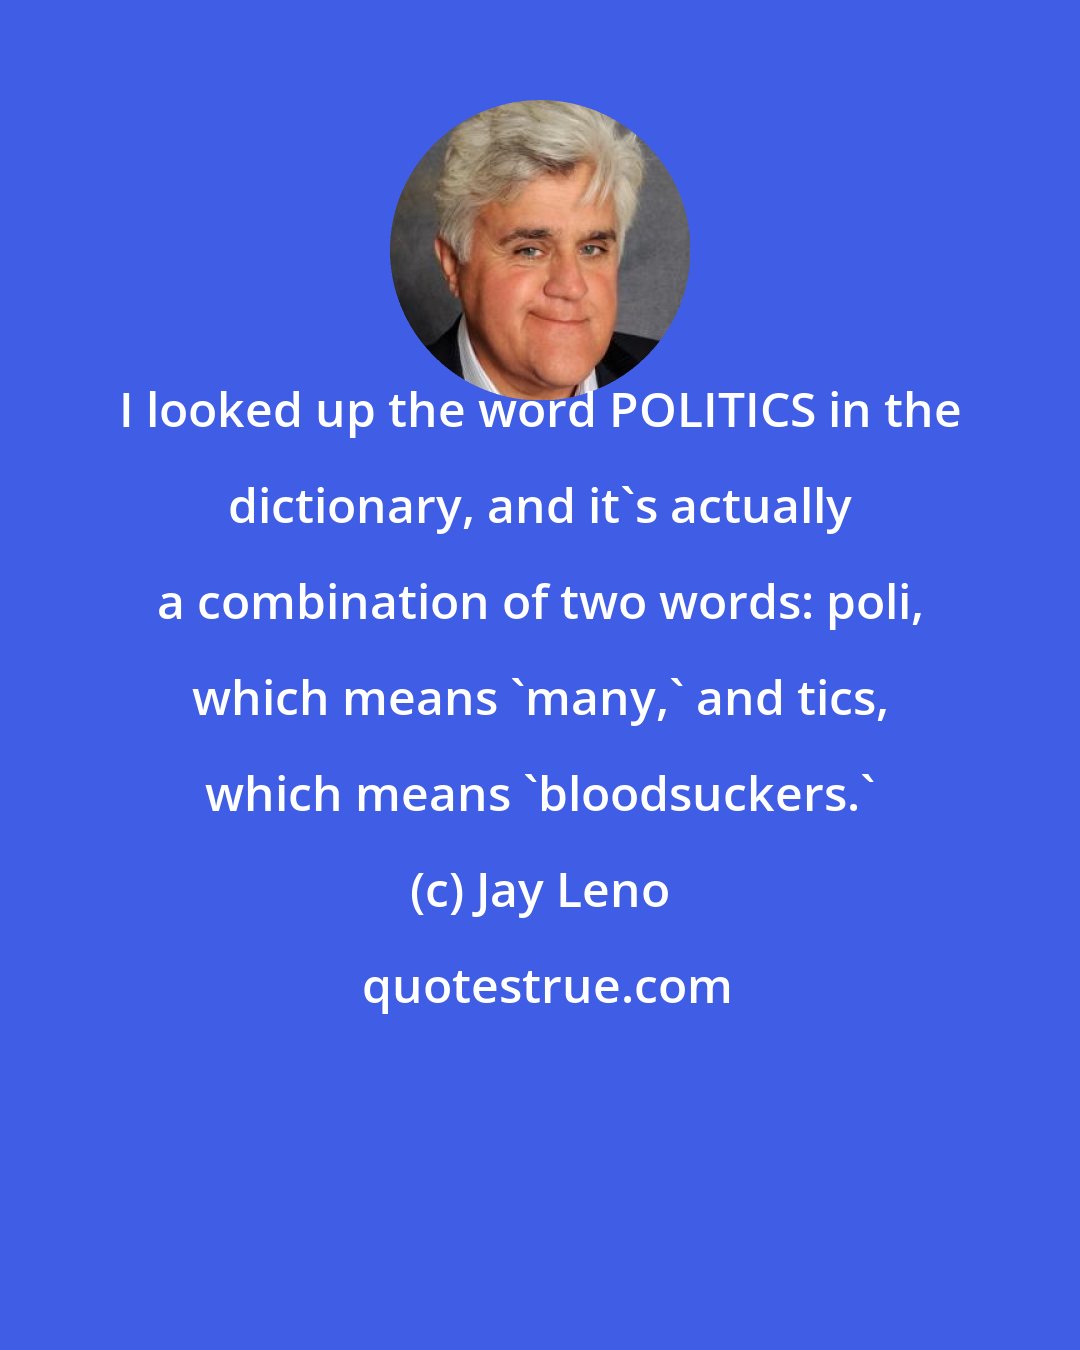 Jay Leno: I looked up the word POLITICS in the dictionary, and it's actually a combination of two words: poli, which means 'many,' and tics, which means 'bloodsuckers.'